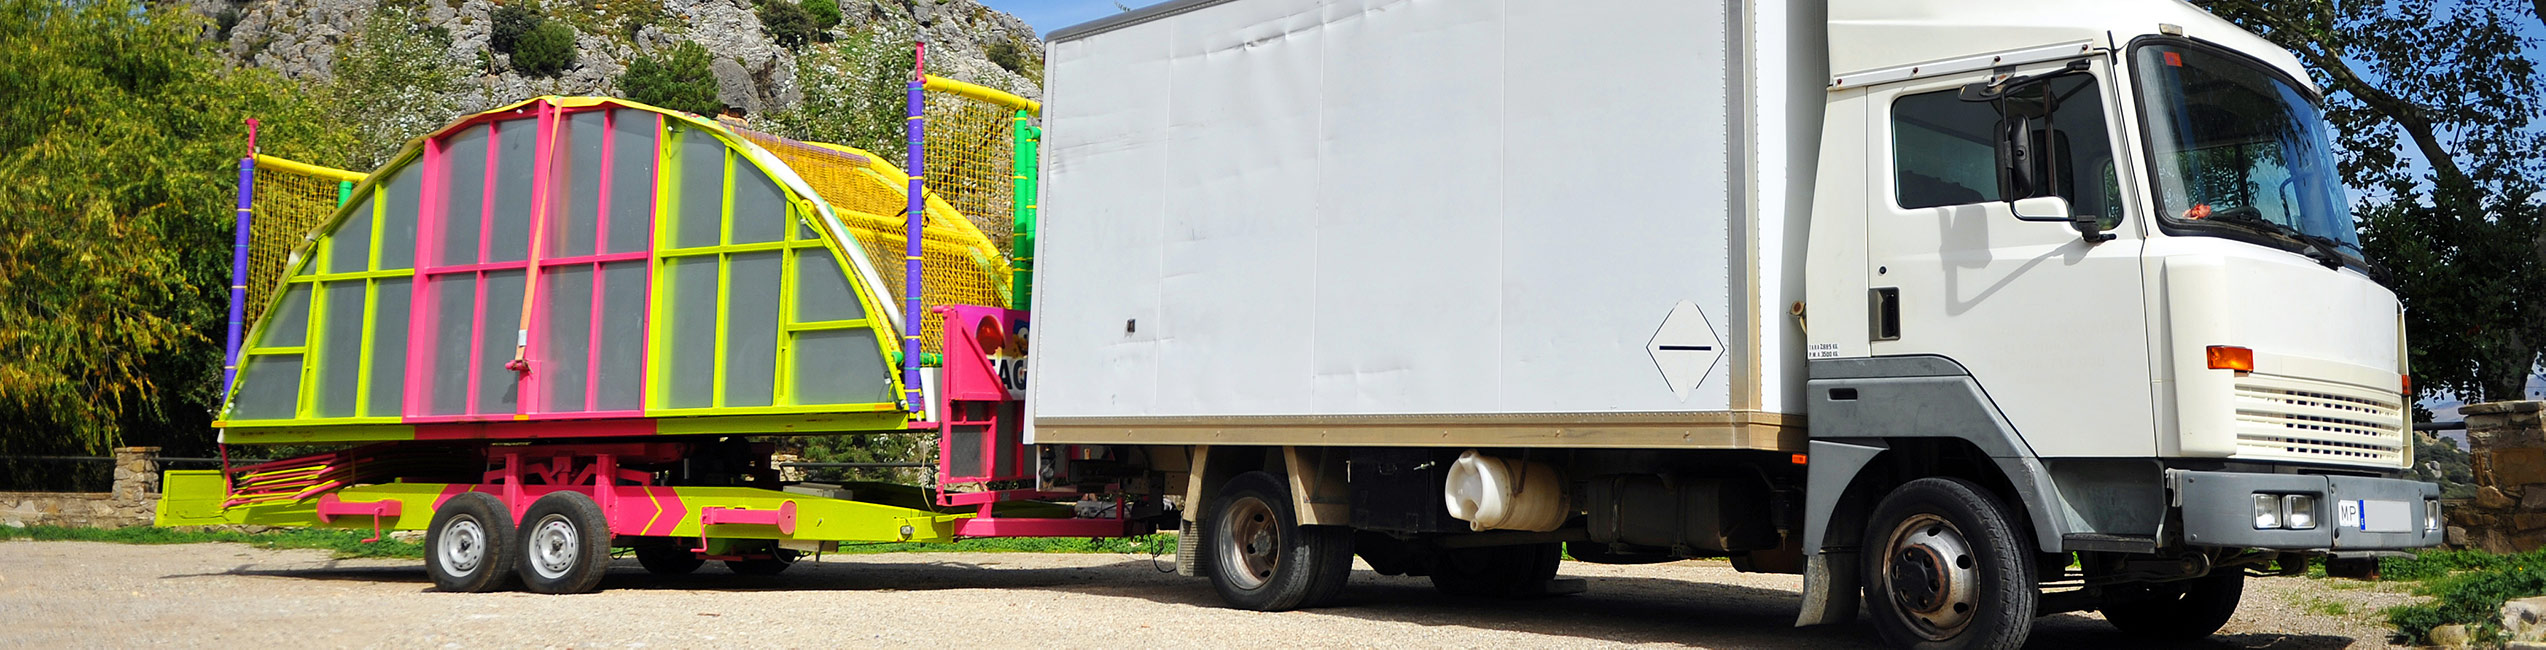 Truck carrying carnival equipment